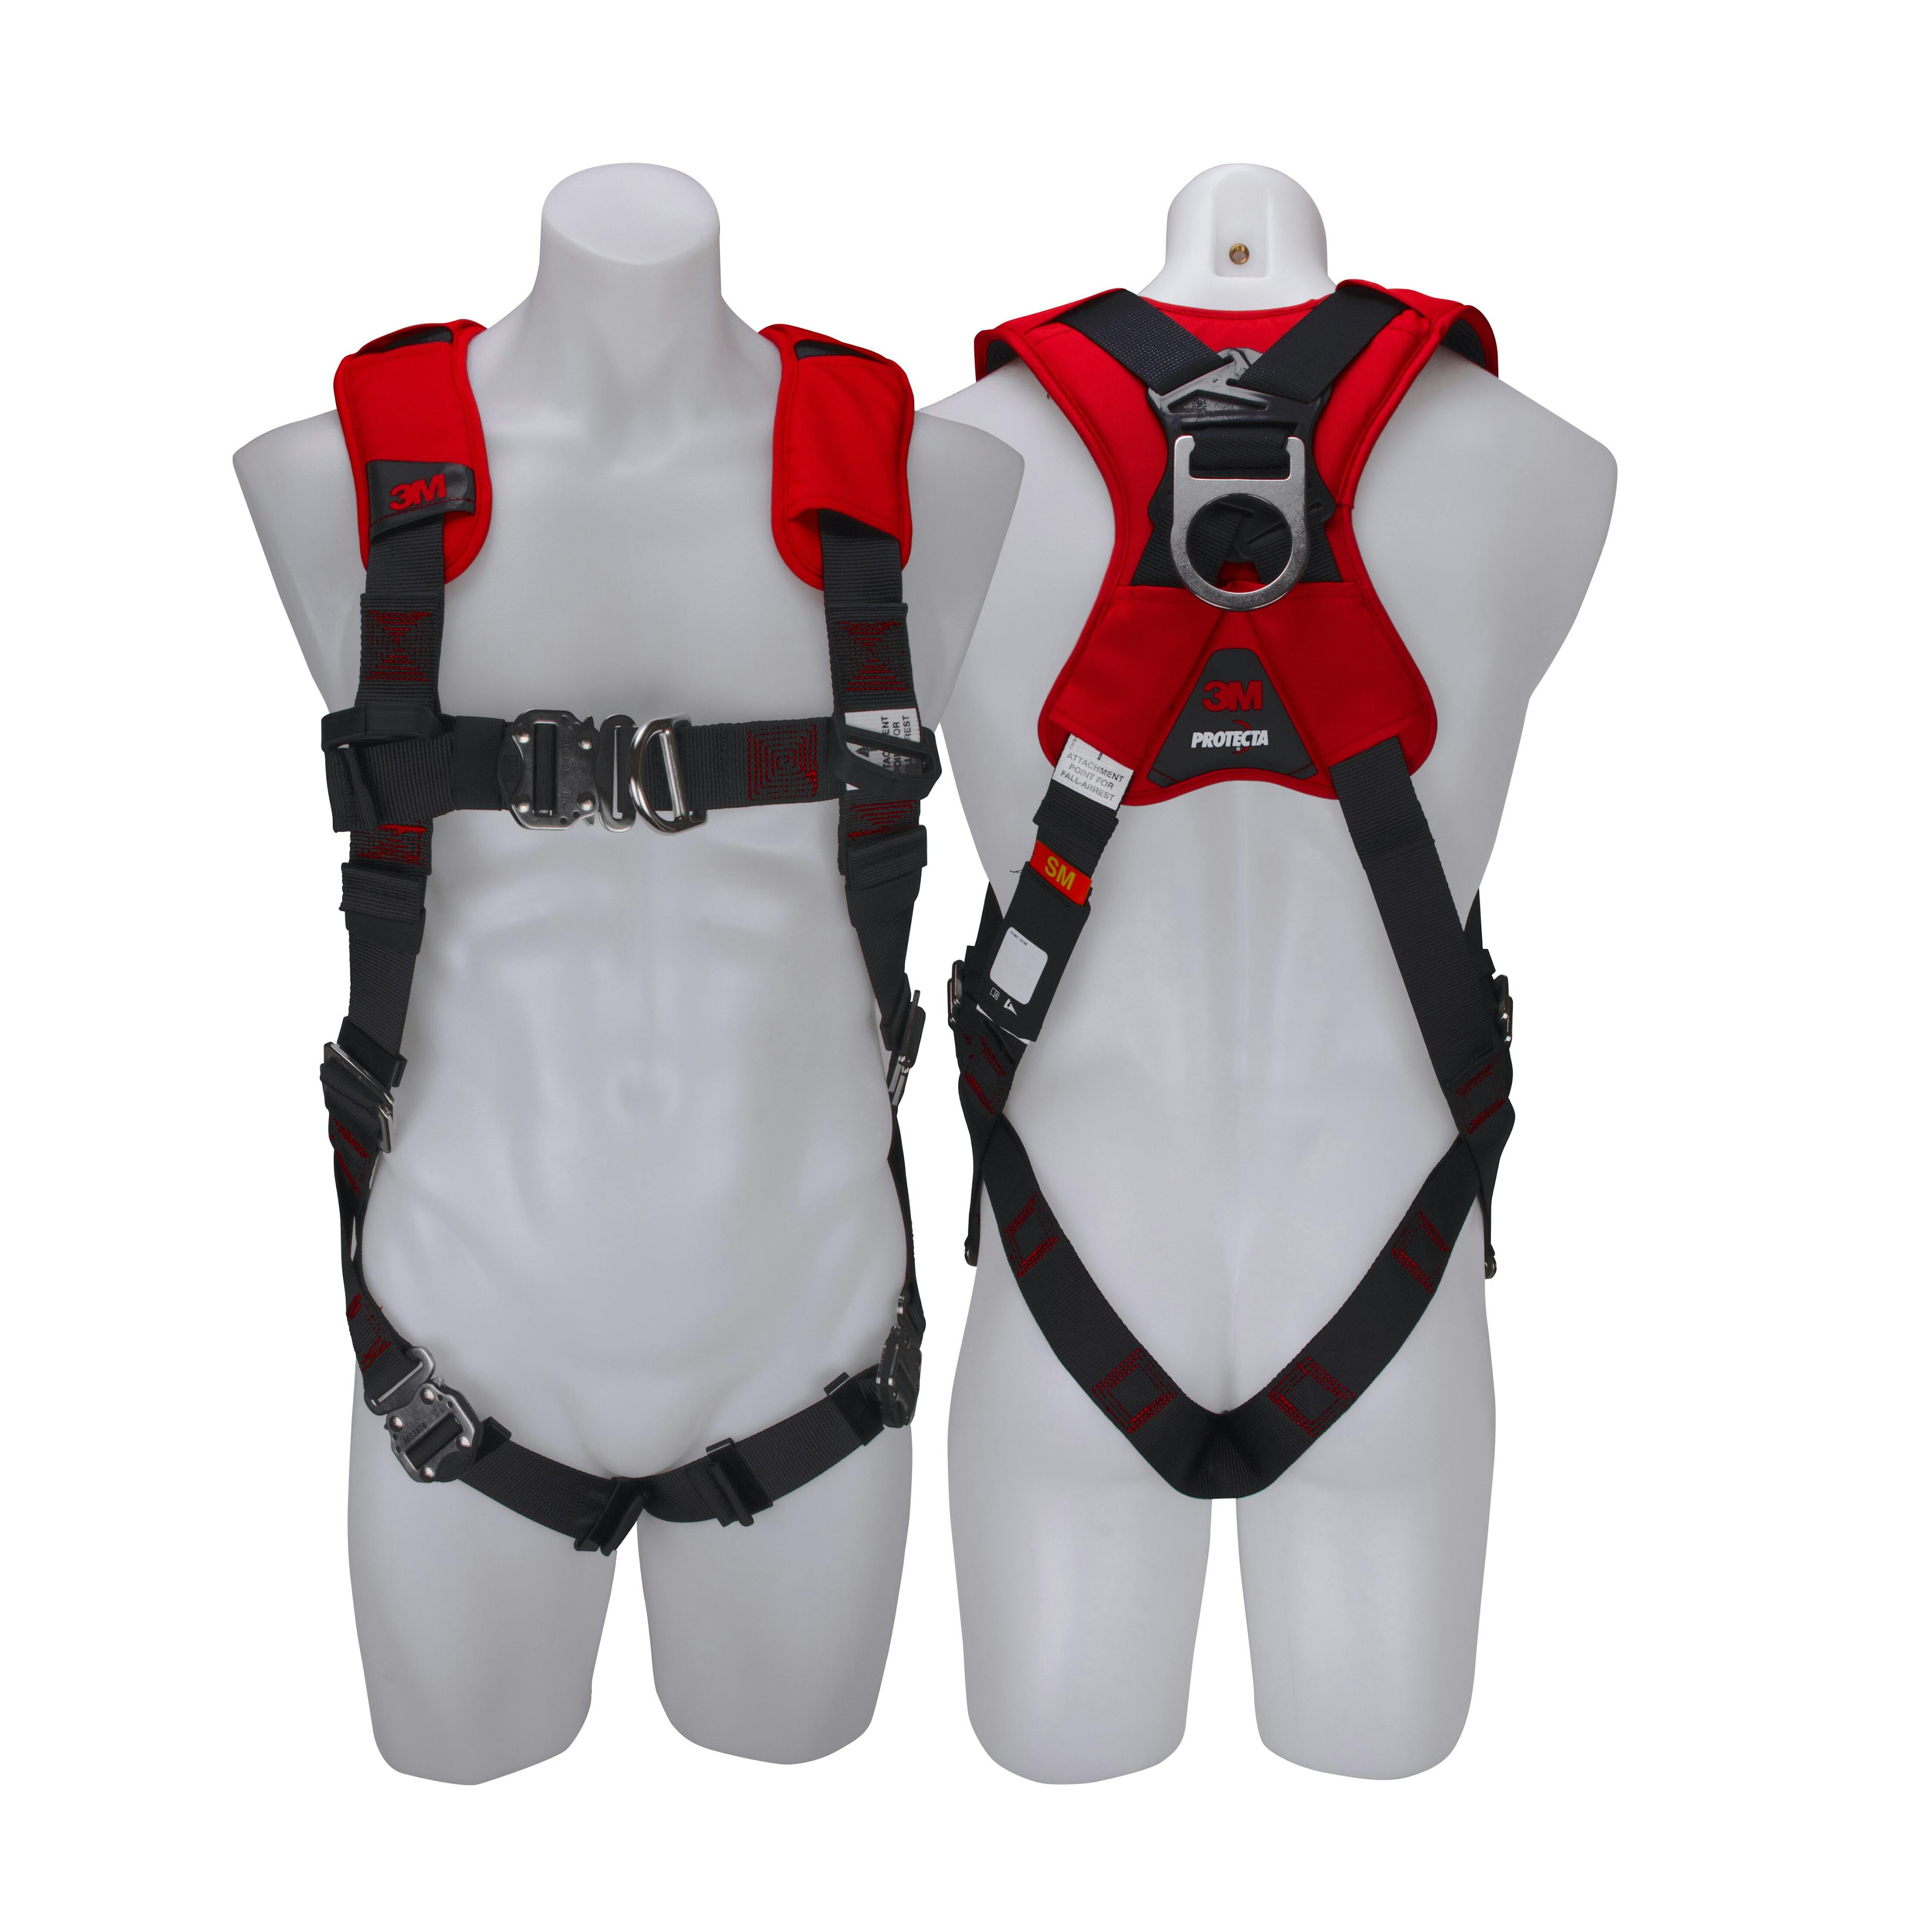 3M™ PROTECTA® X Riggers Harness with Stainless Steel and Padding 1161670, Red and Black, Large, 1 EA/Case